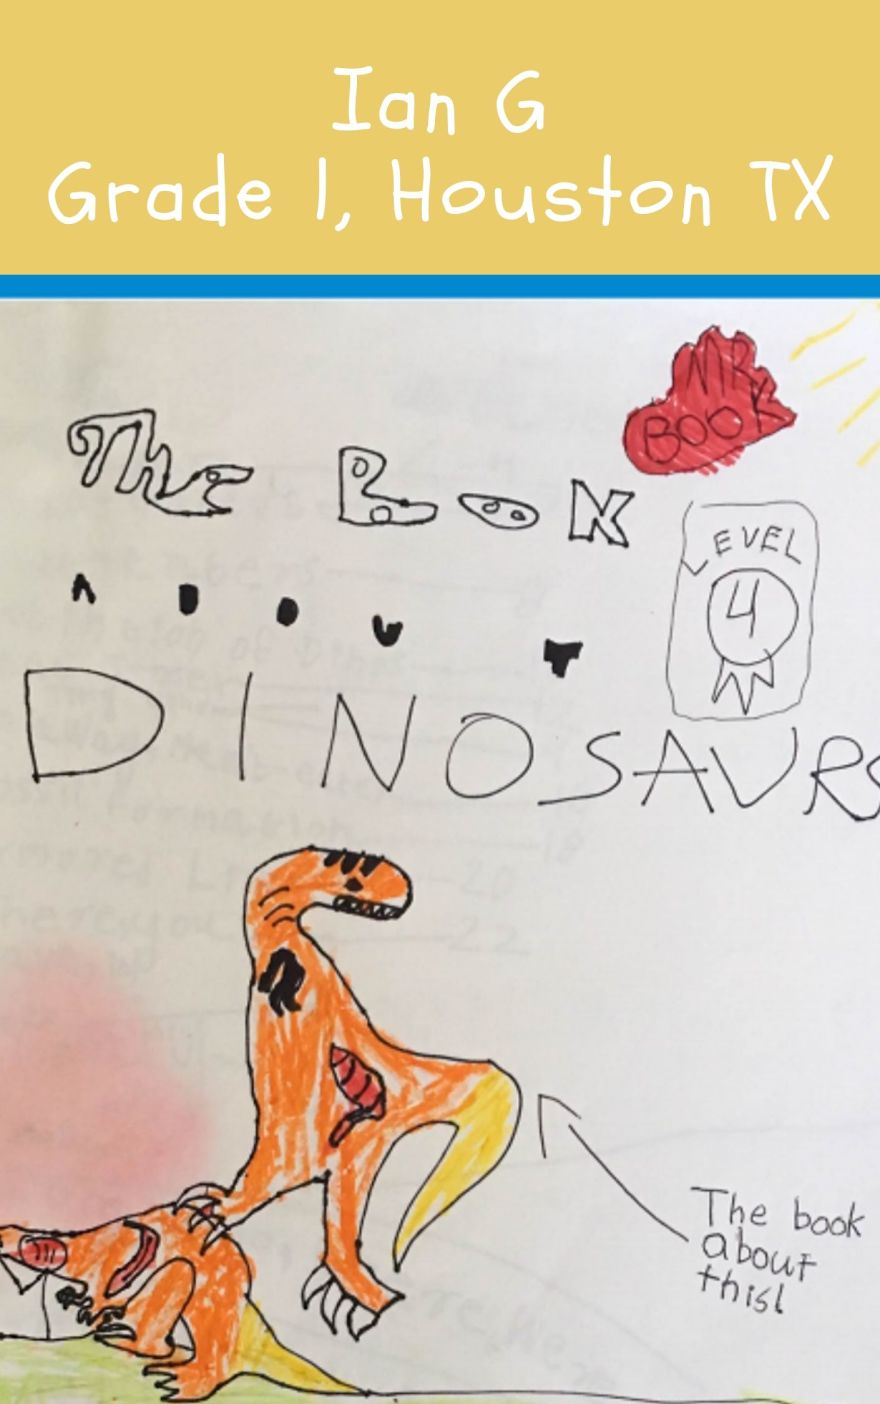 10 Elementary Kids Illustrated & Wrote Their Own Books With The Winning Words Project.